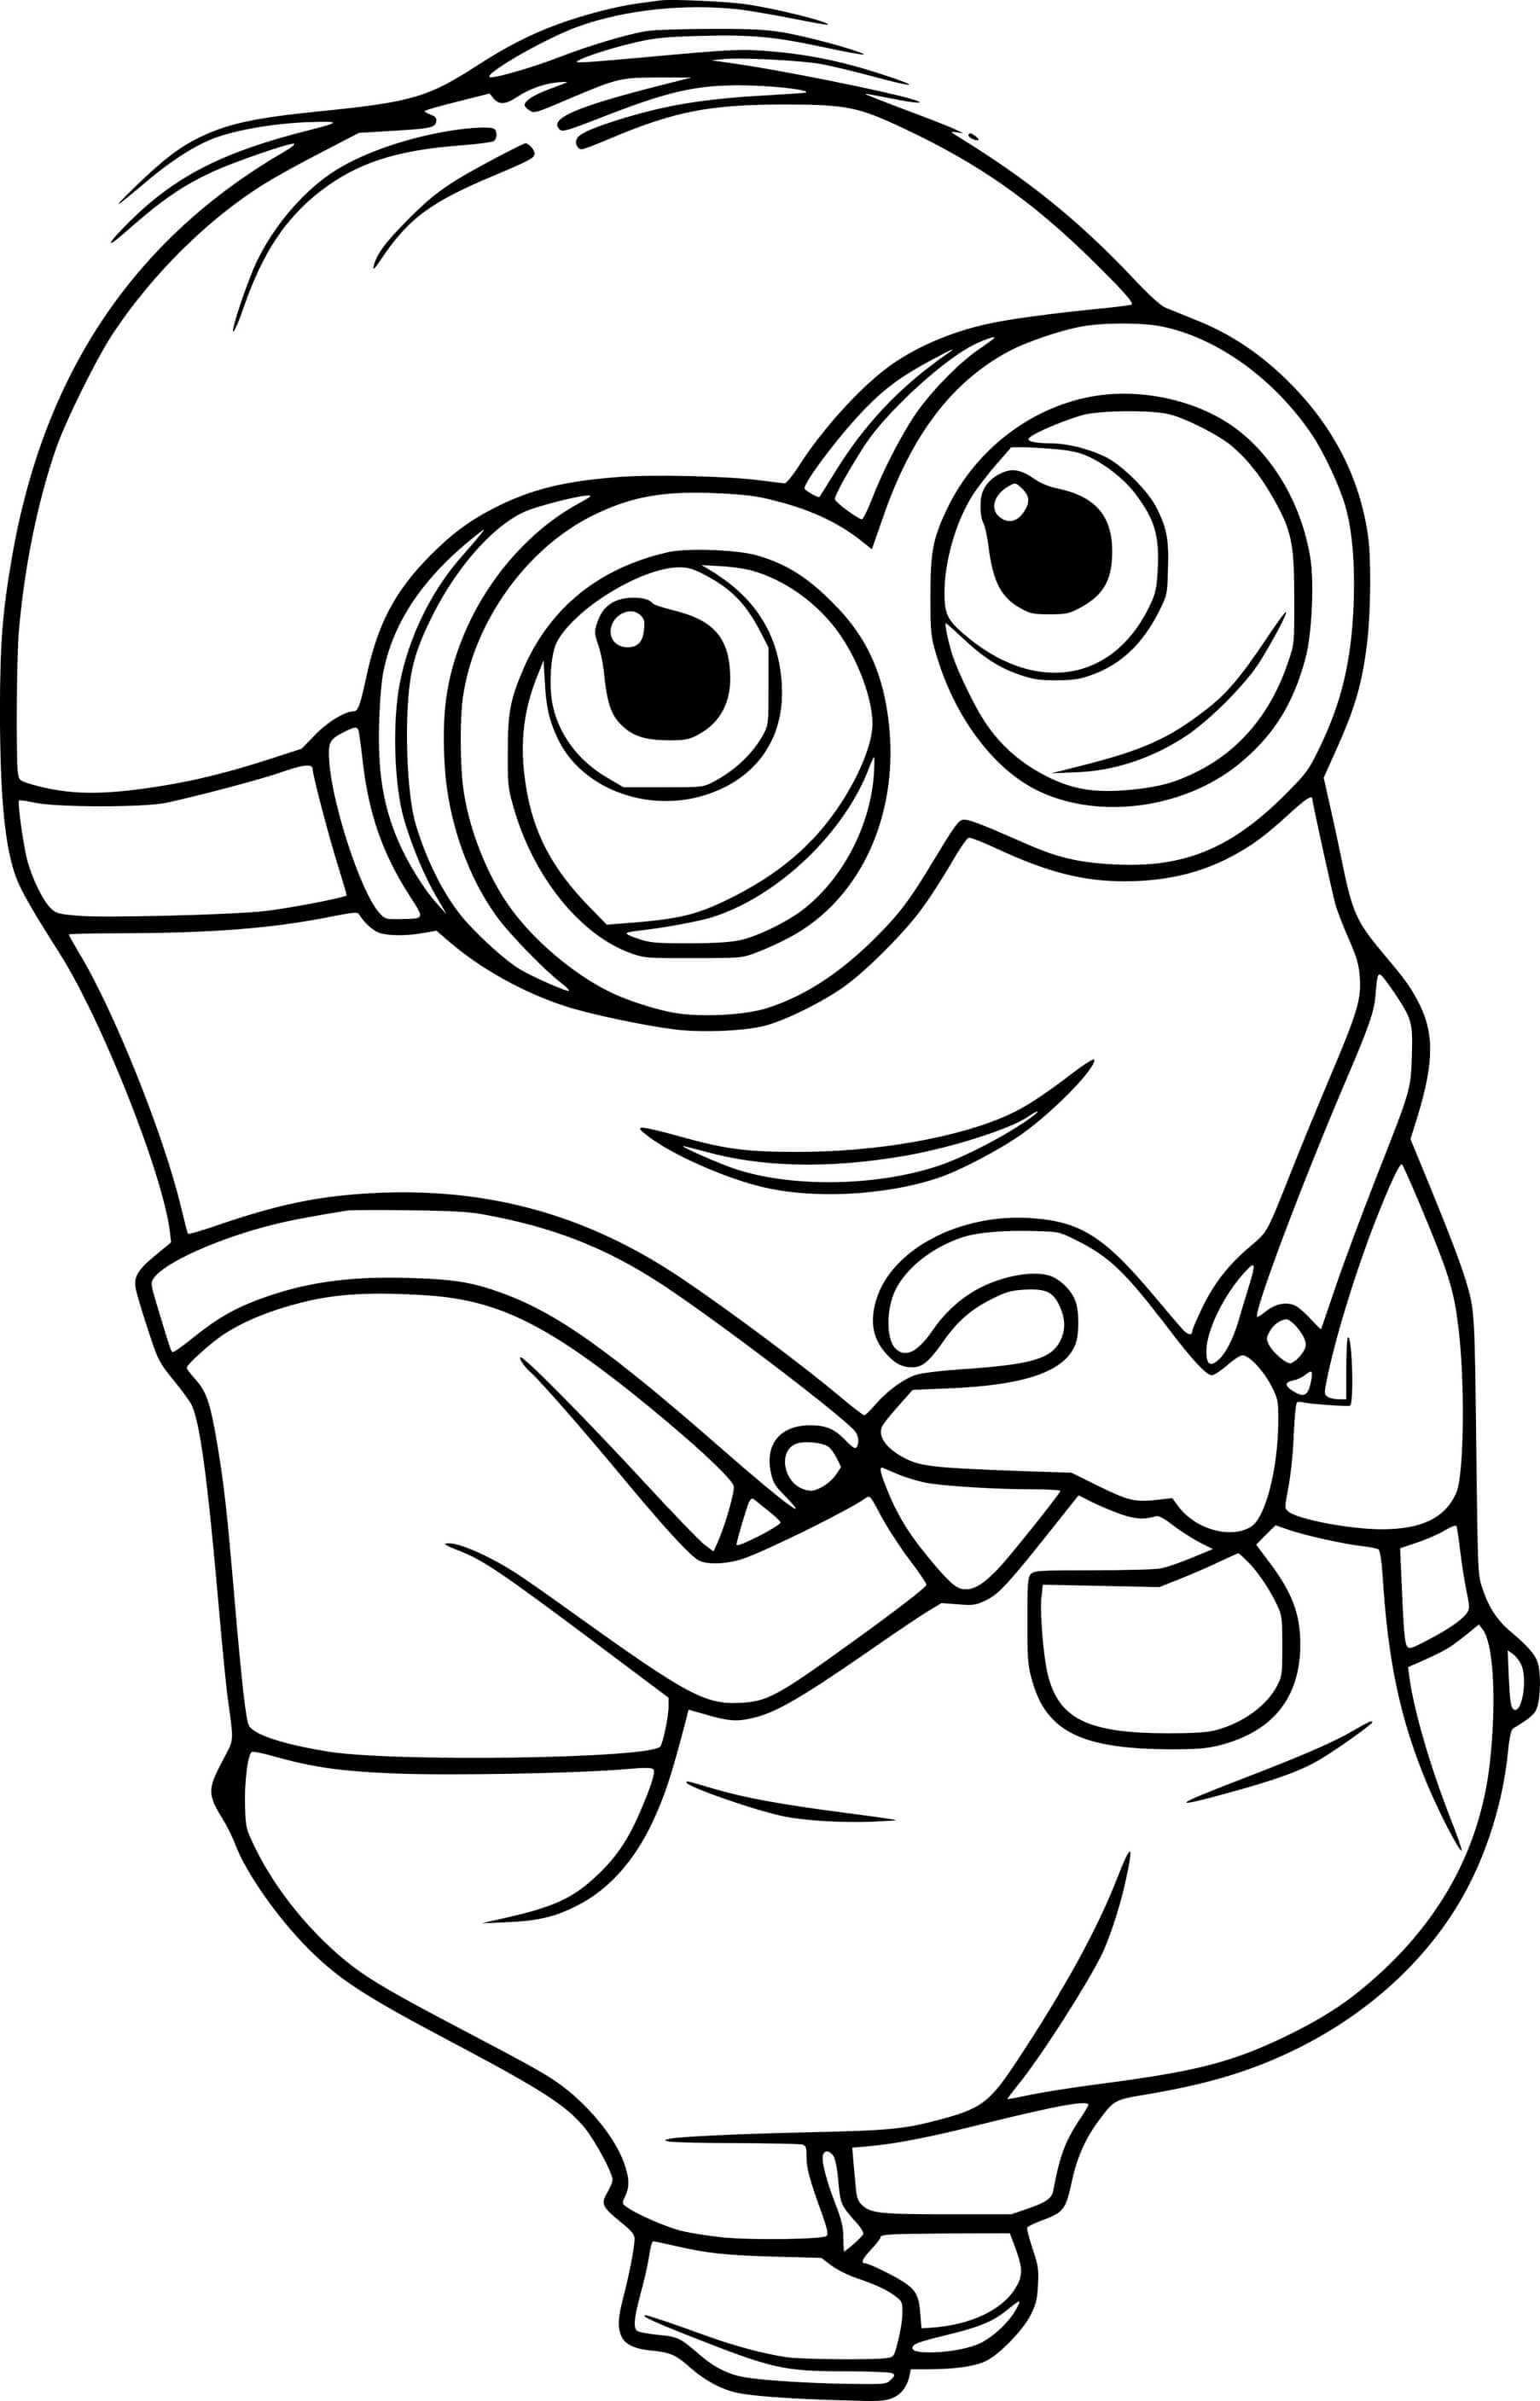 Dave Minion Smiling Coloring Page